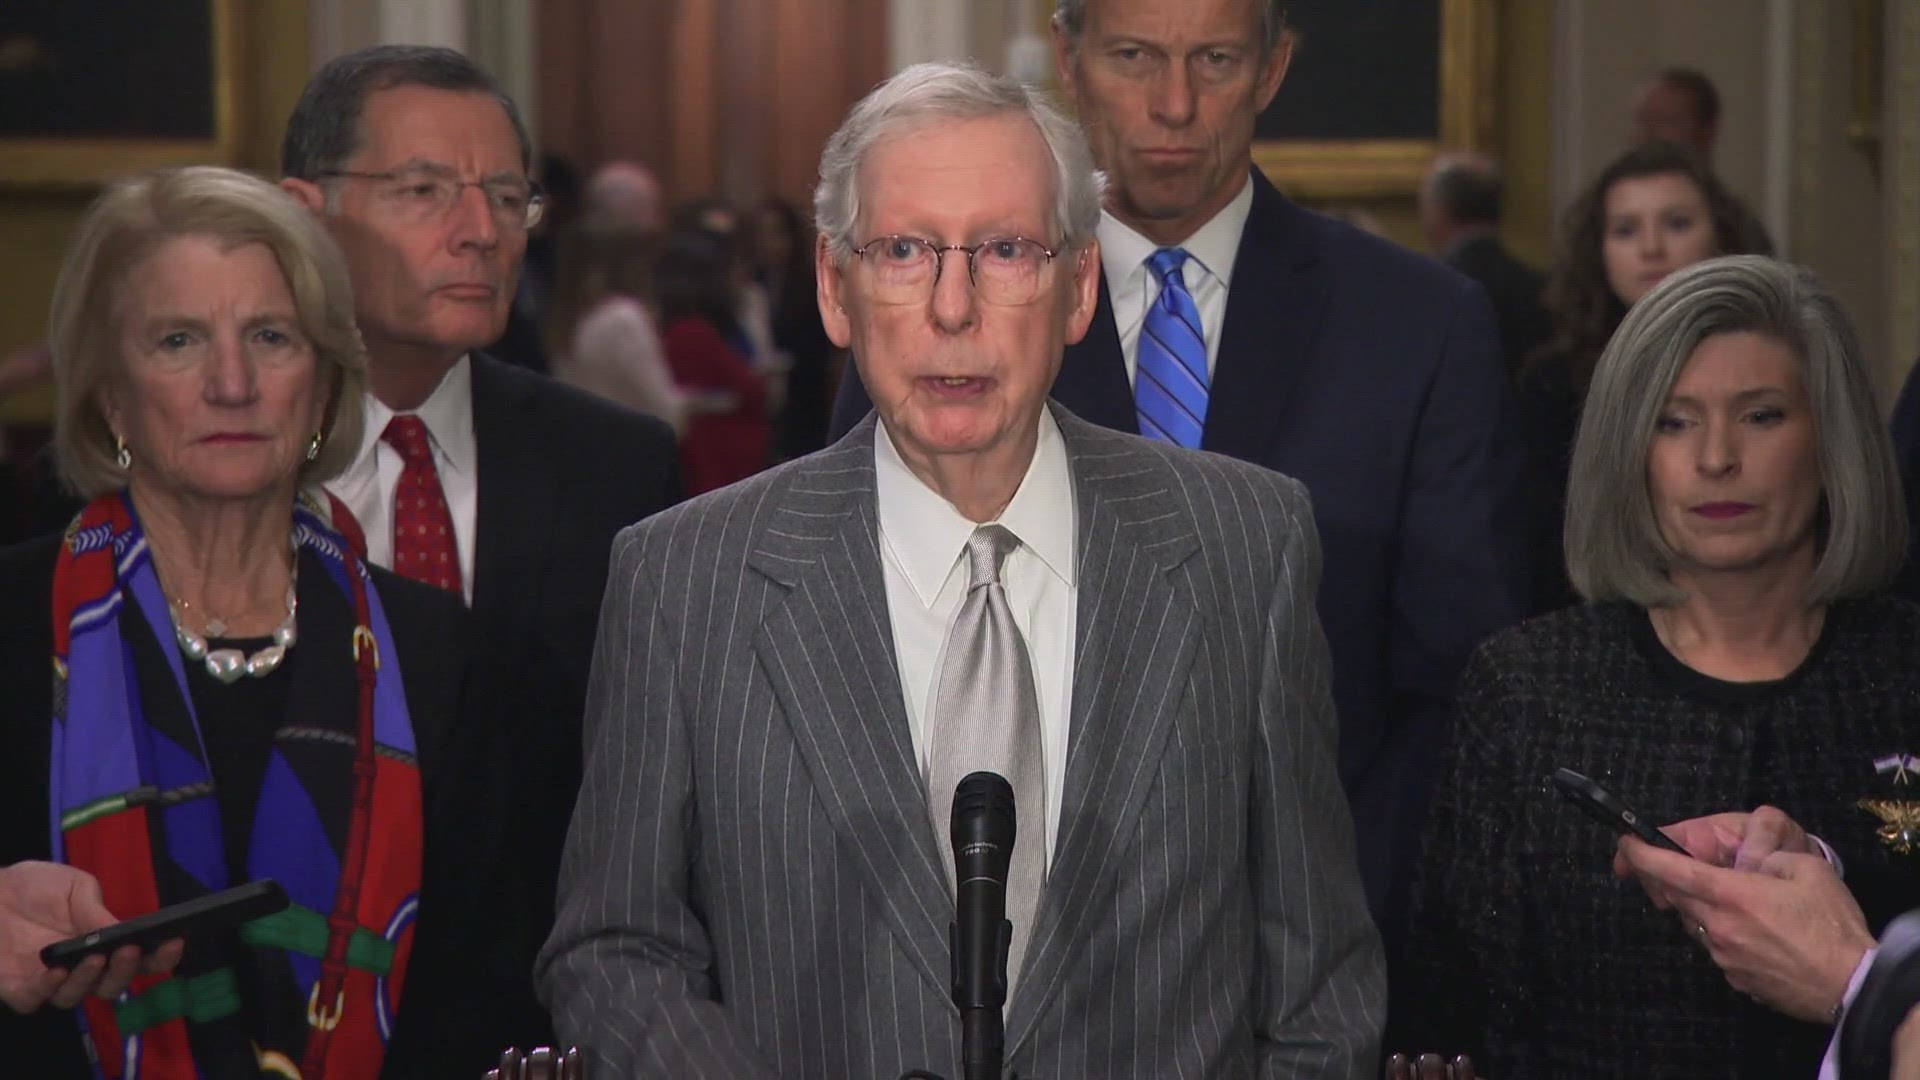 The 82-year-old lawmaker from Kentucky is the longest-serving Senate leader in U.S. history.